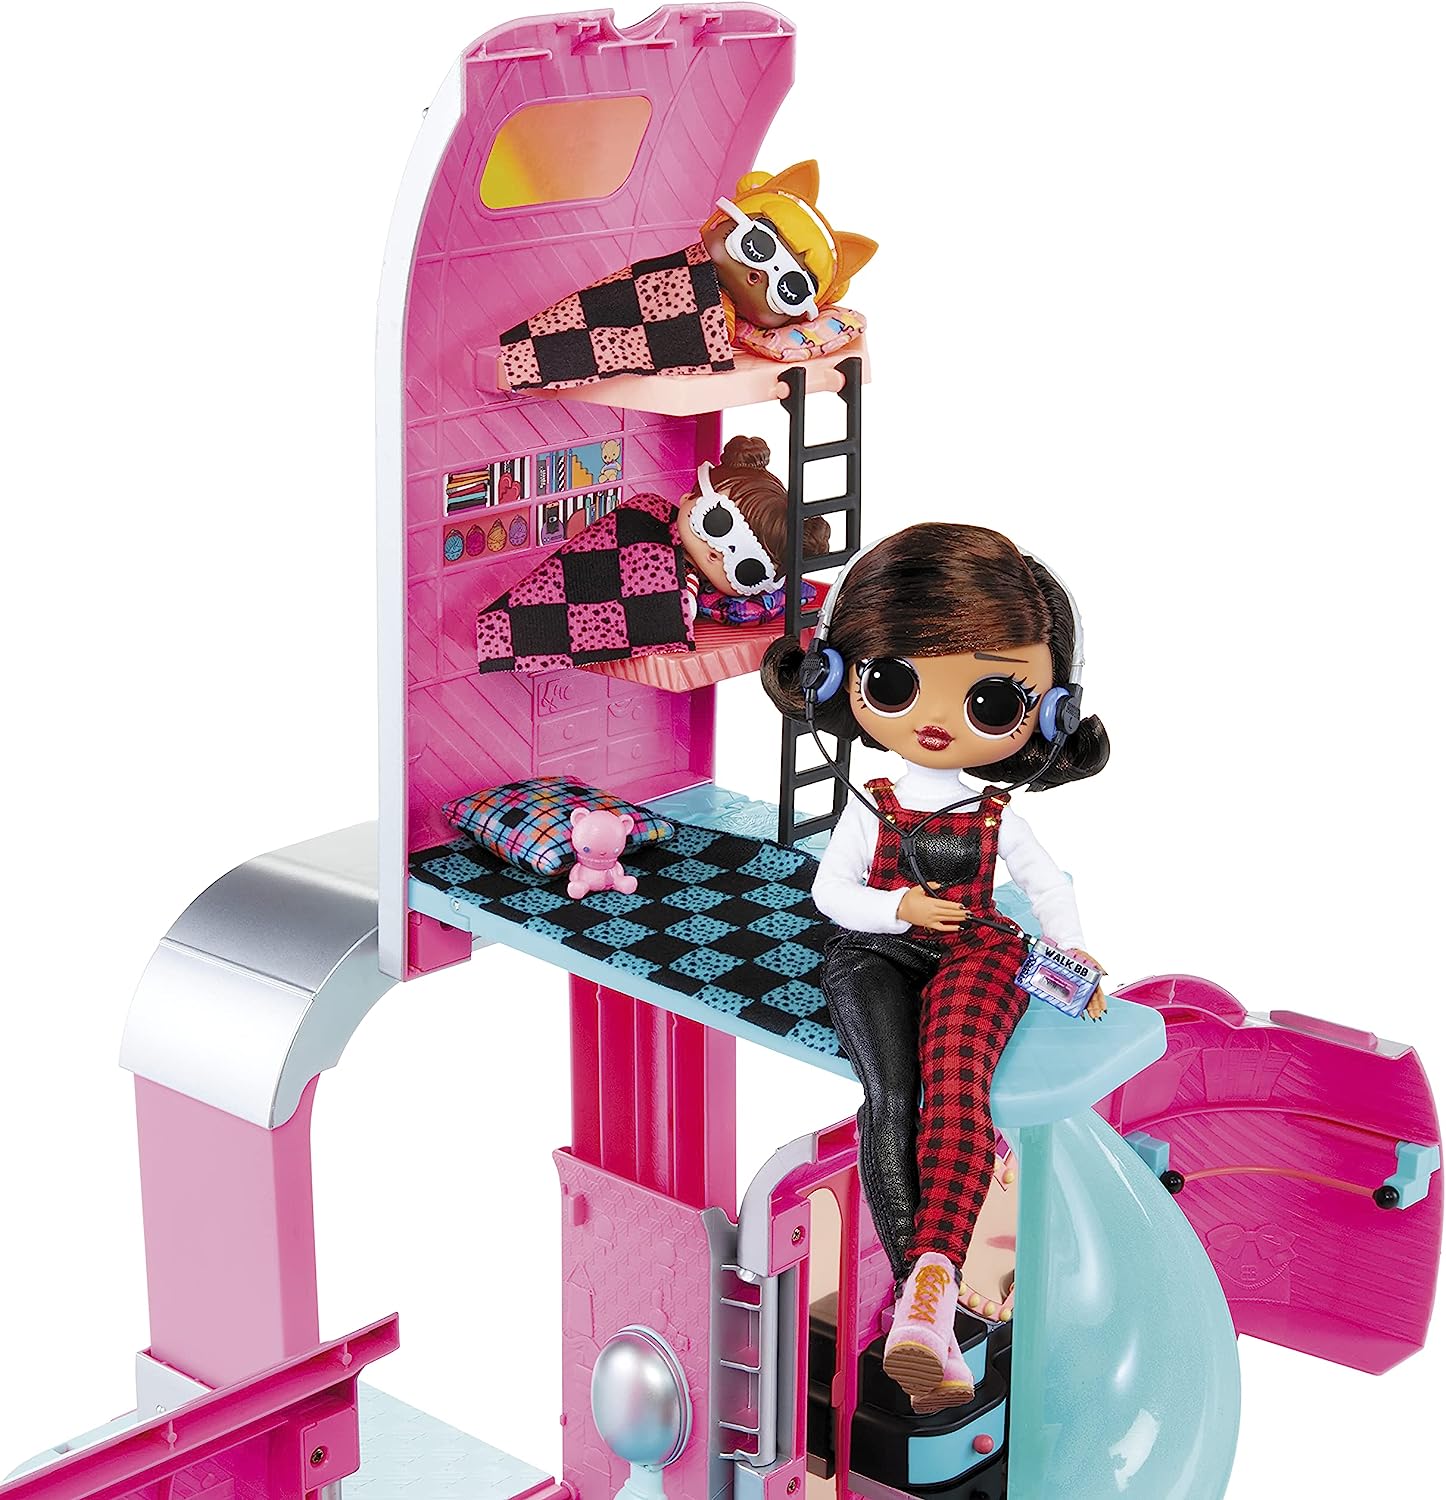 LOL Surprise OMG Glamper Fashion Camper Doll Playset with 55+ Surprises,  Fully-Furnished with Light Up Pool, Water Slide, Bunk Beds, Cafe, BBQ  Grill, DJ Booth - Gift Toy for Girls Ages 4